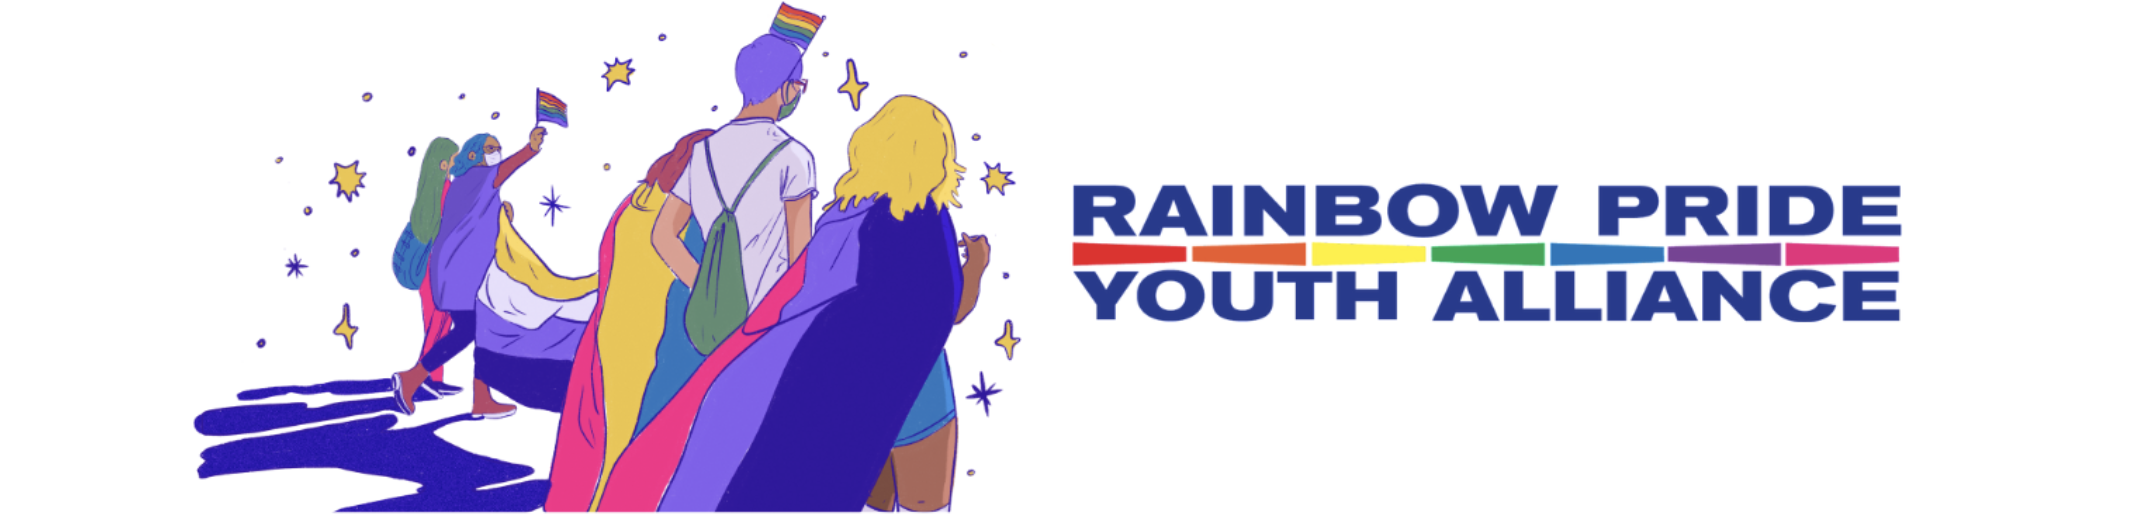 Hand drawn super heroes and text that reads Rainbow Youth Alliance with a rainbow line.